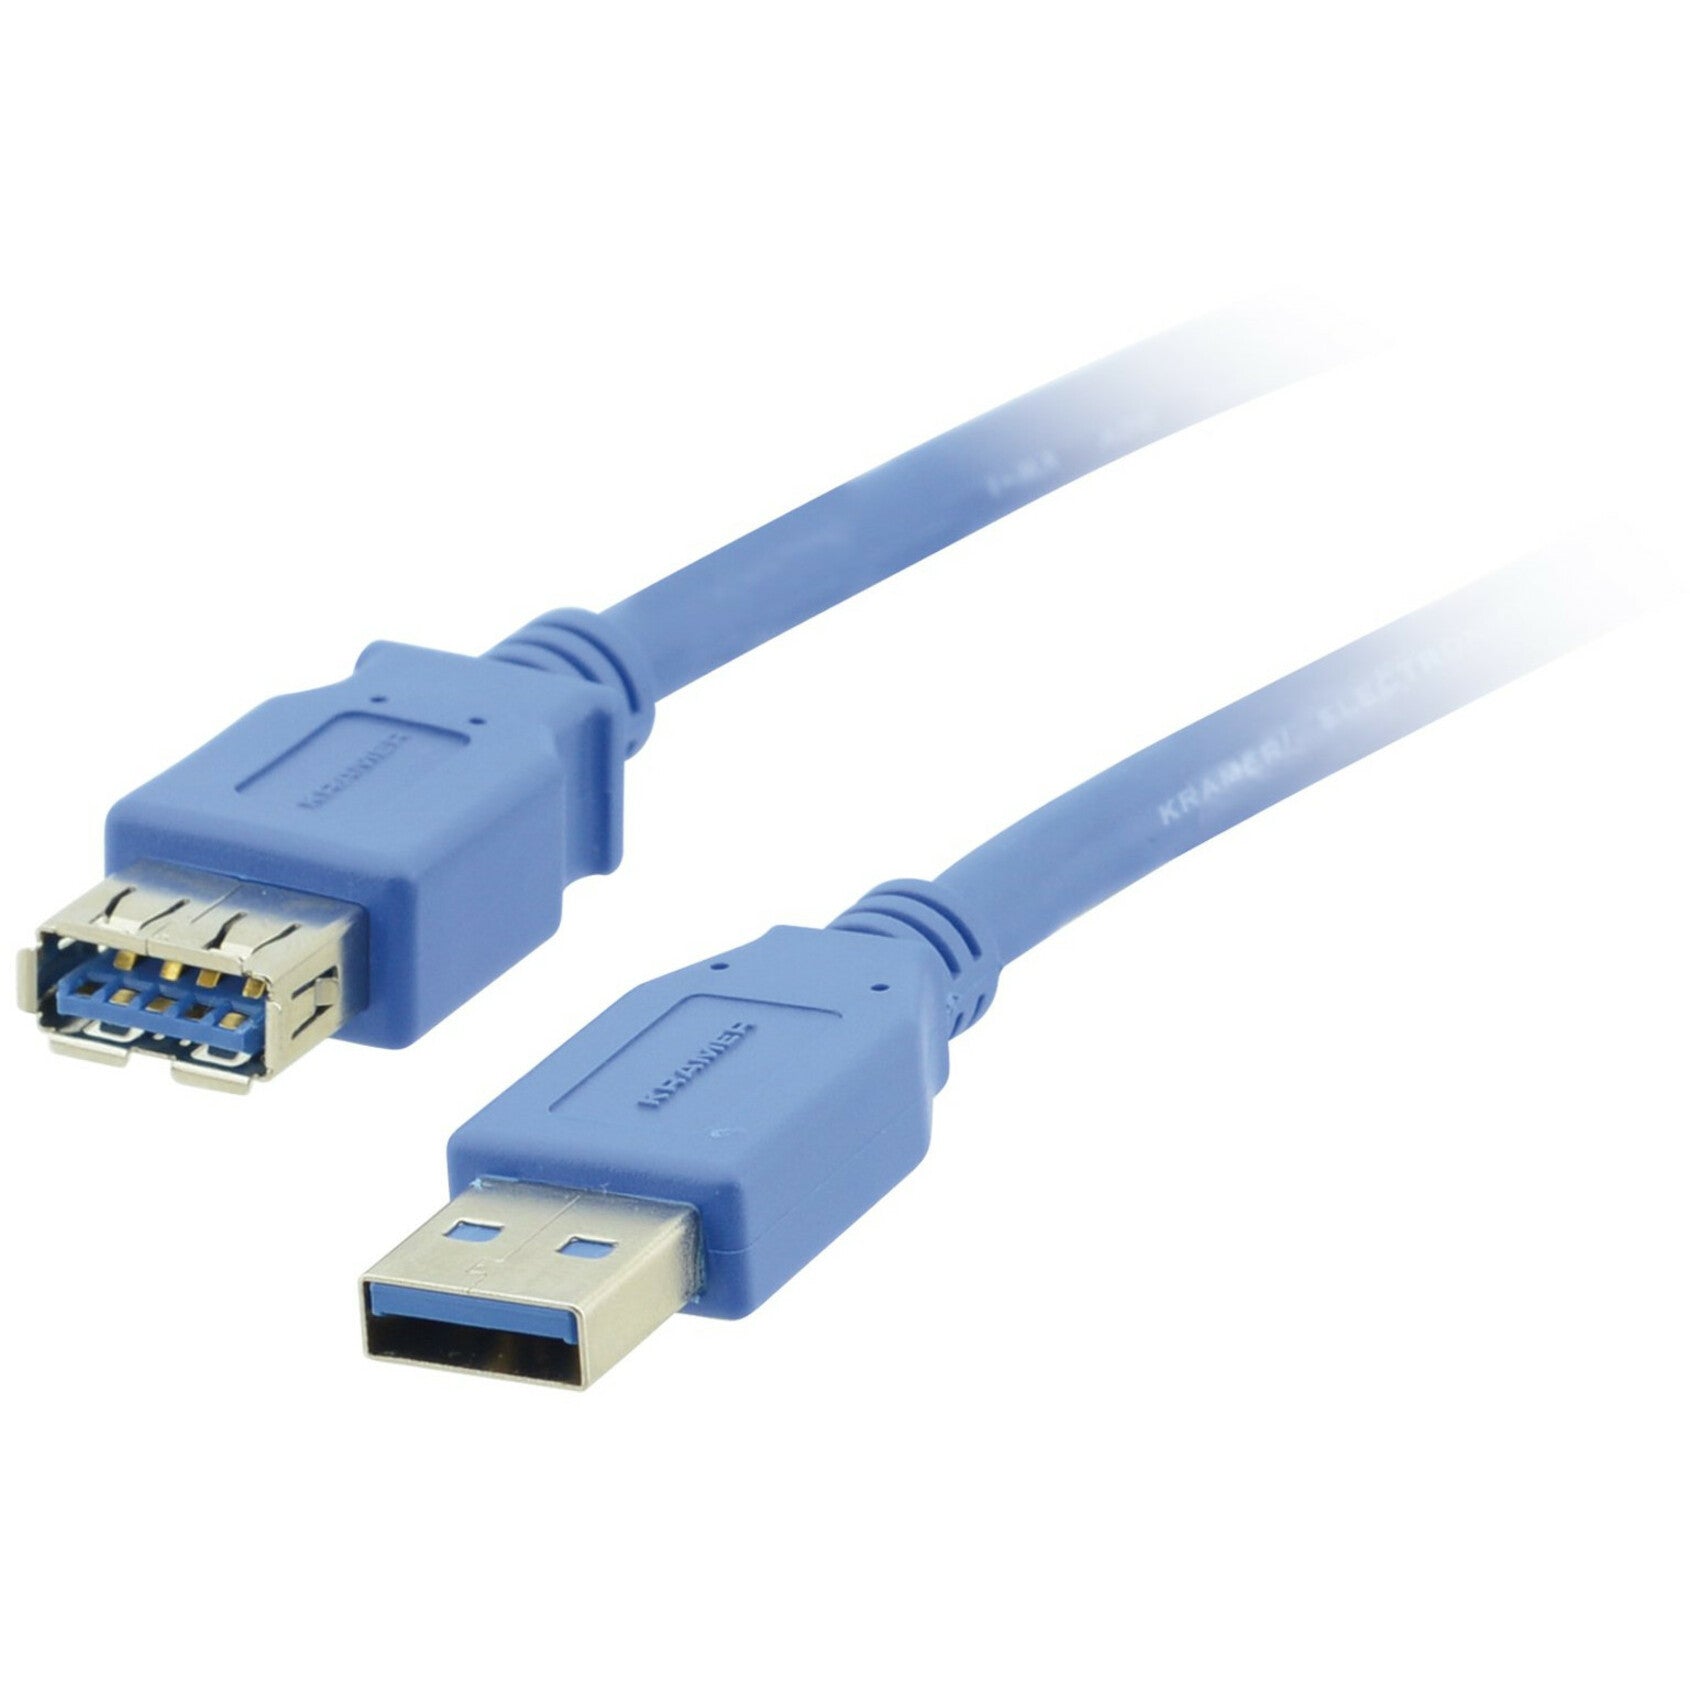 Kramer 96-02310006 USB 3.0 A (M) to A (F) Extension Cable, 6 ft, Strain Relief, EMI/RF Protection